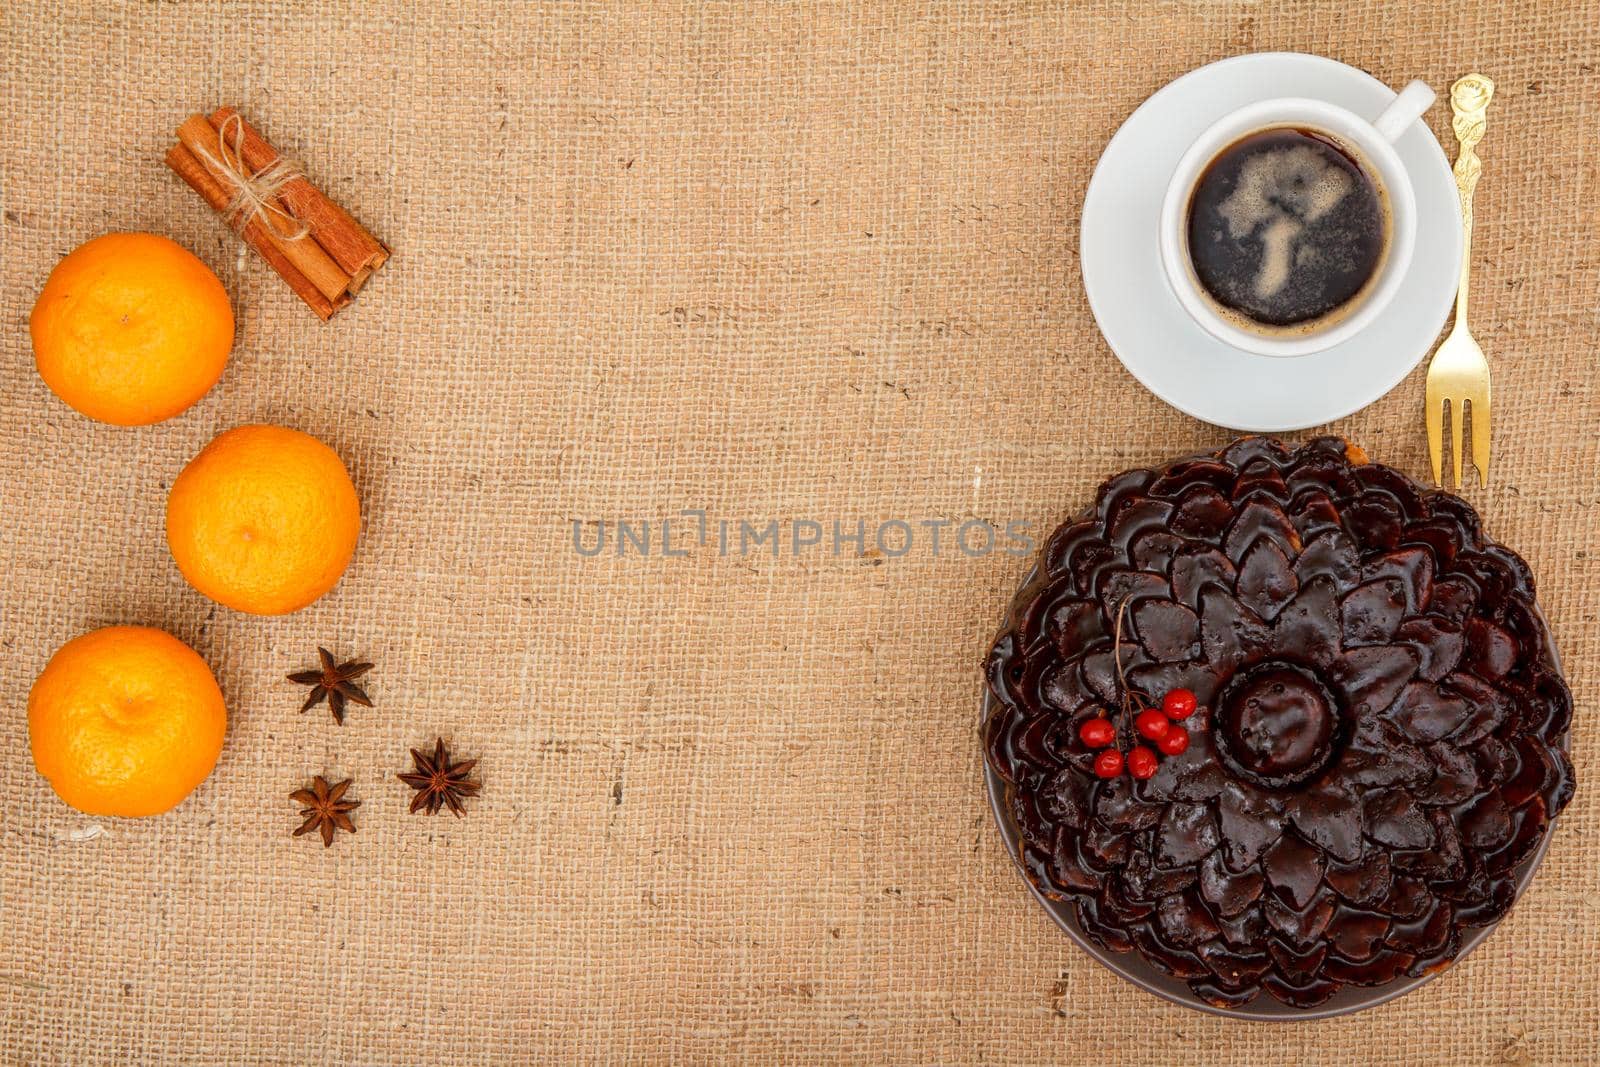 Chocolate cake decorated with bunch of viburnum, fork and cup of coffee beside it, oranges, star anise and cinnamon on table with sackcloth. Top view